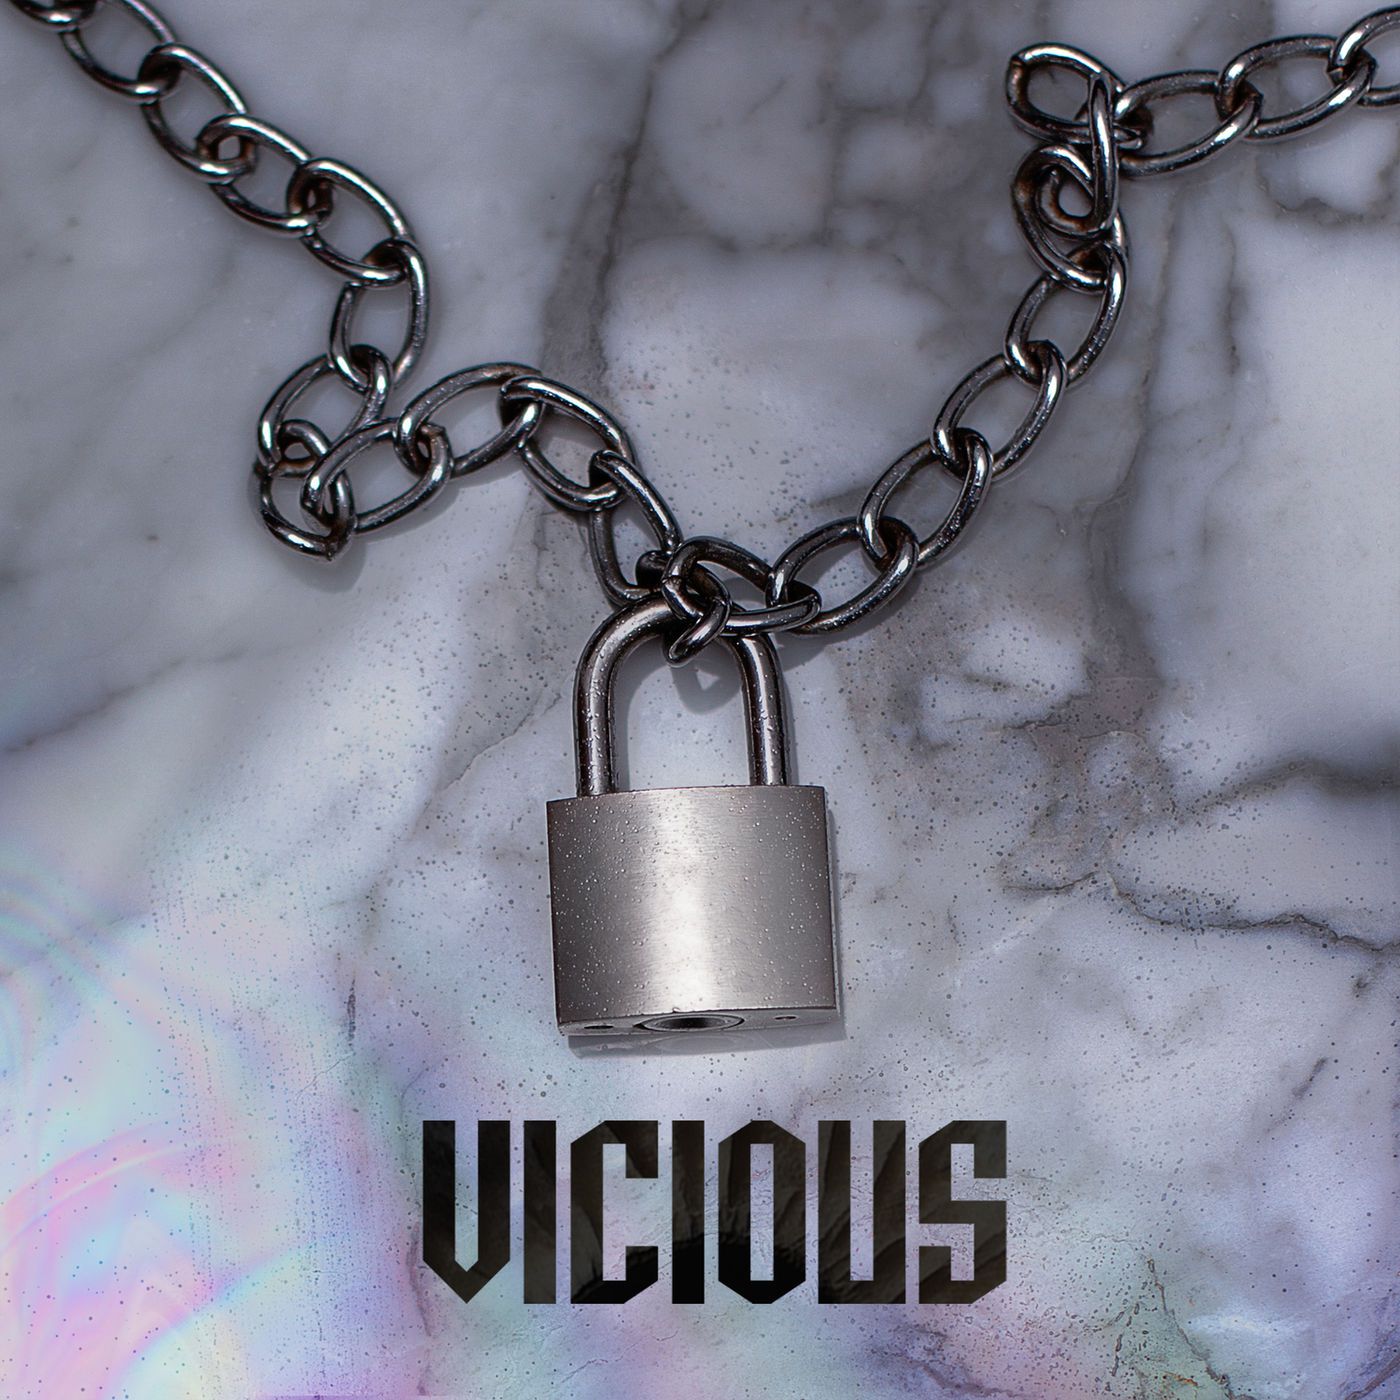 skepta vicious ep stream new Skepta unveils new Vicious EP featuring Lil B, ASAP Rocky: Stream/download